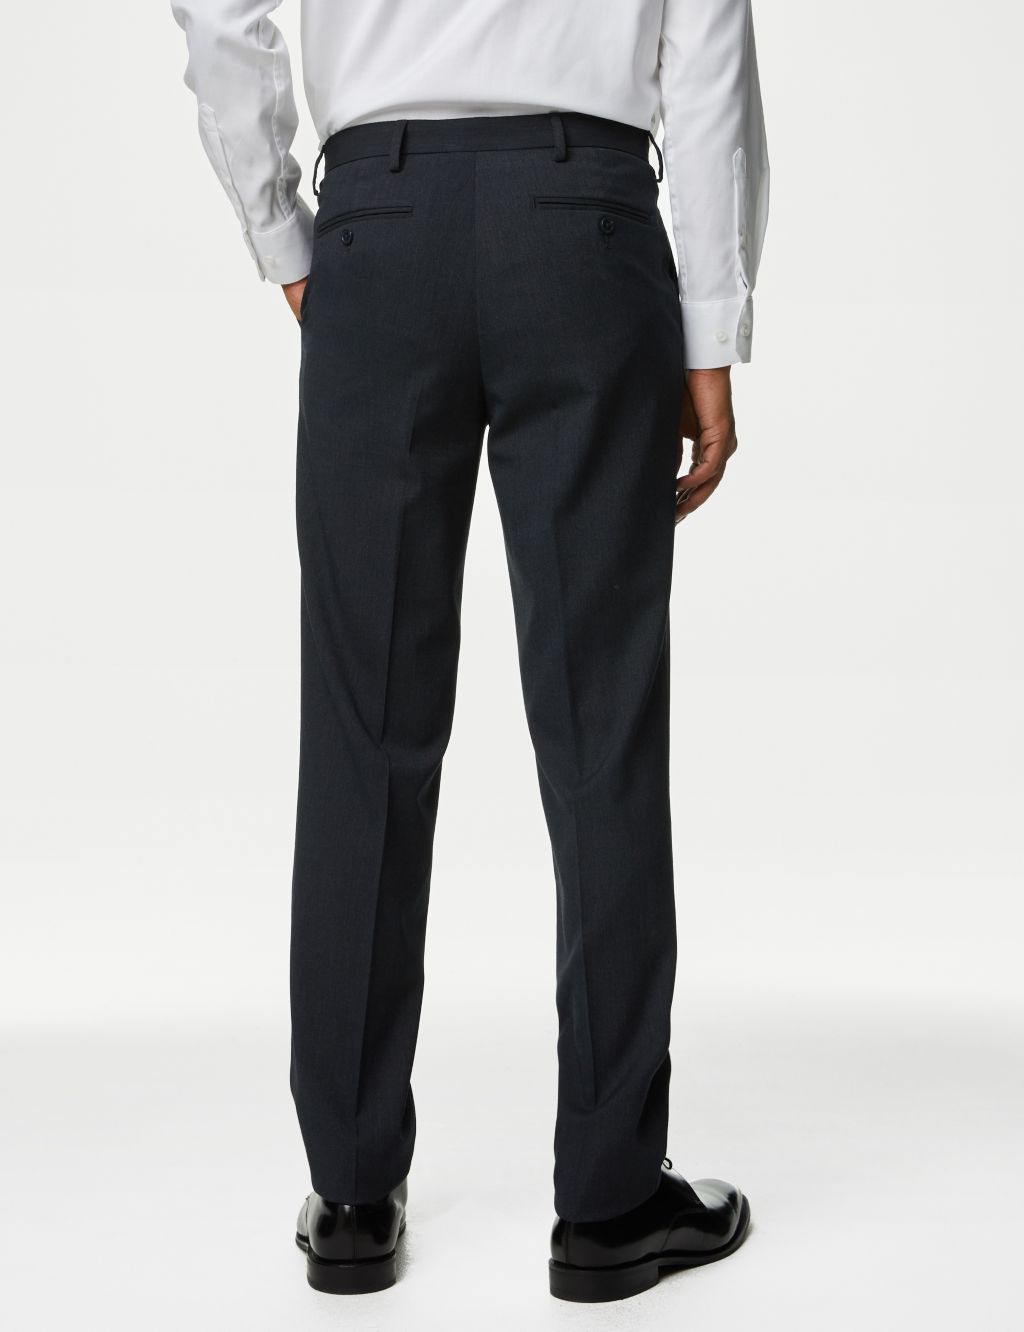 Slim Fit Flat Front Stretch Trousers image 4